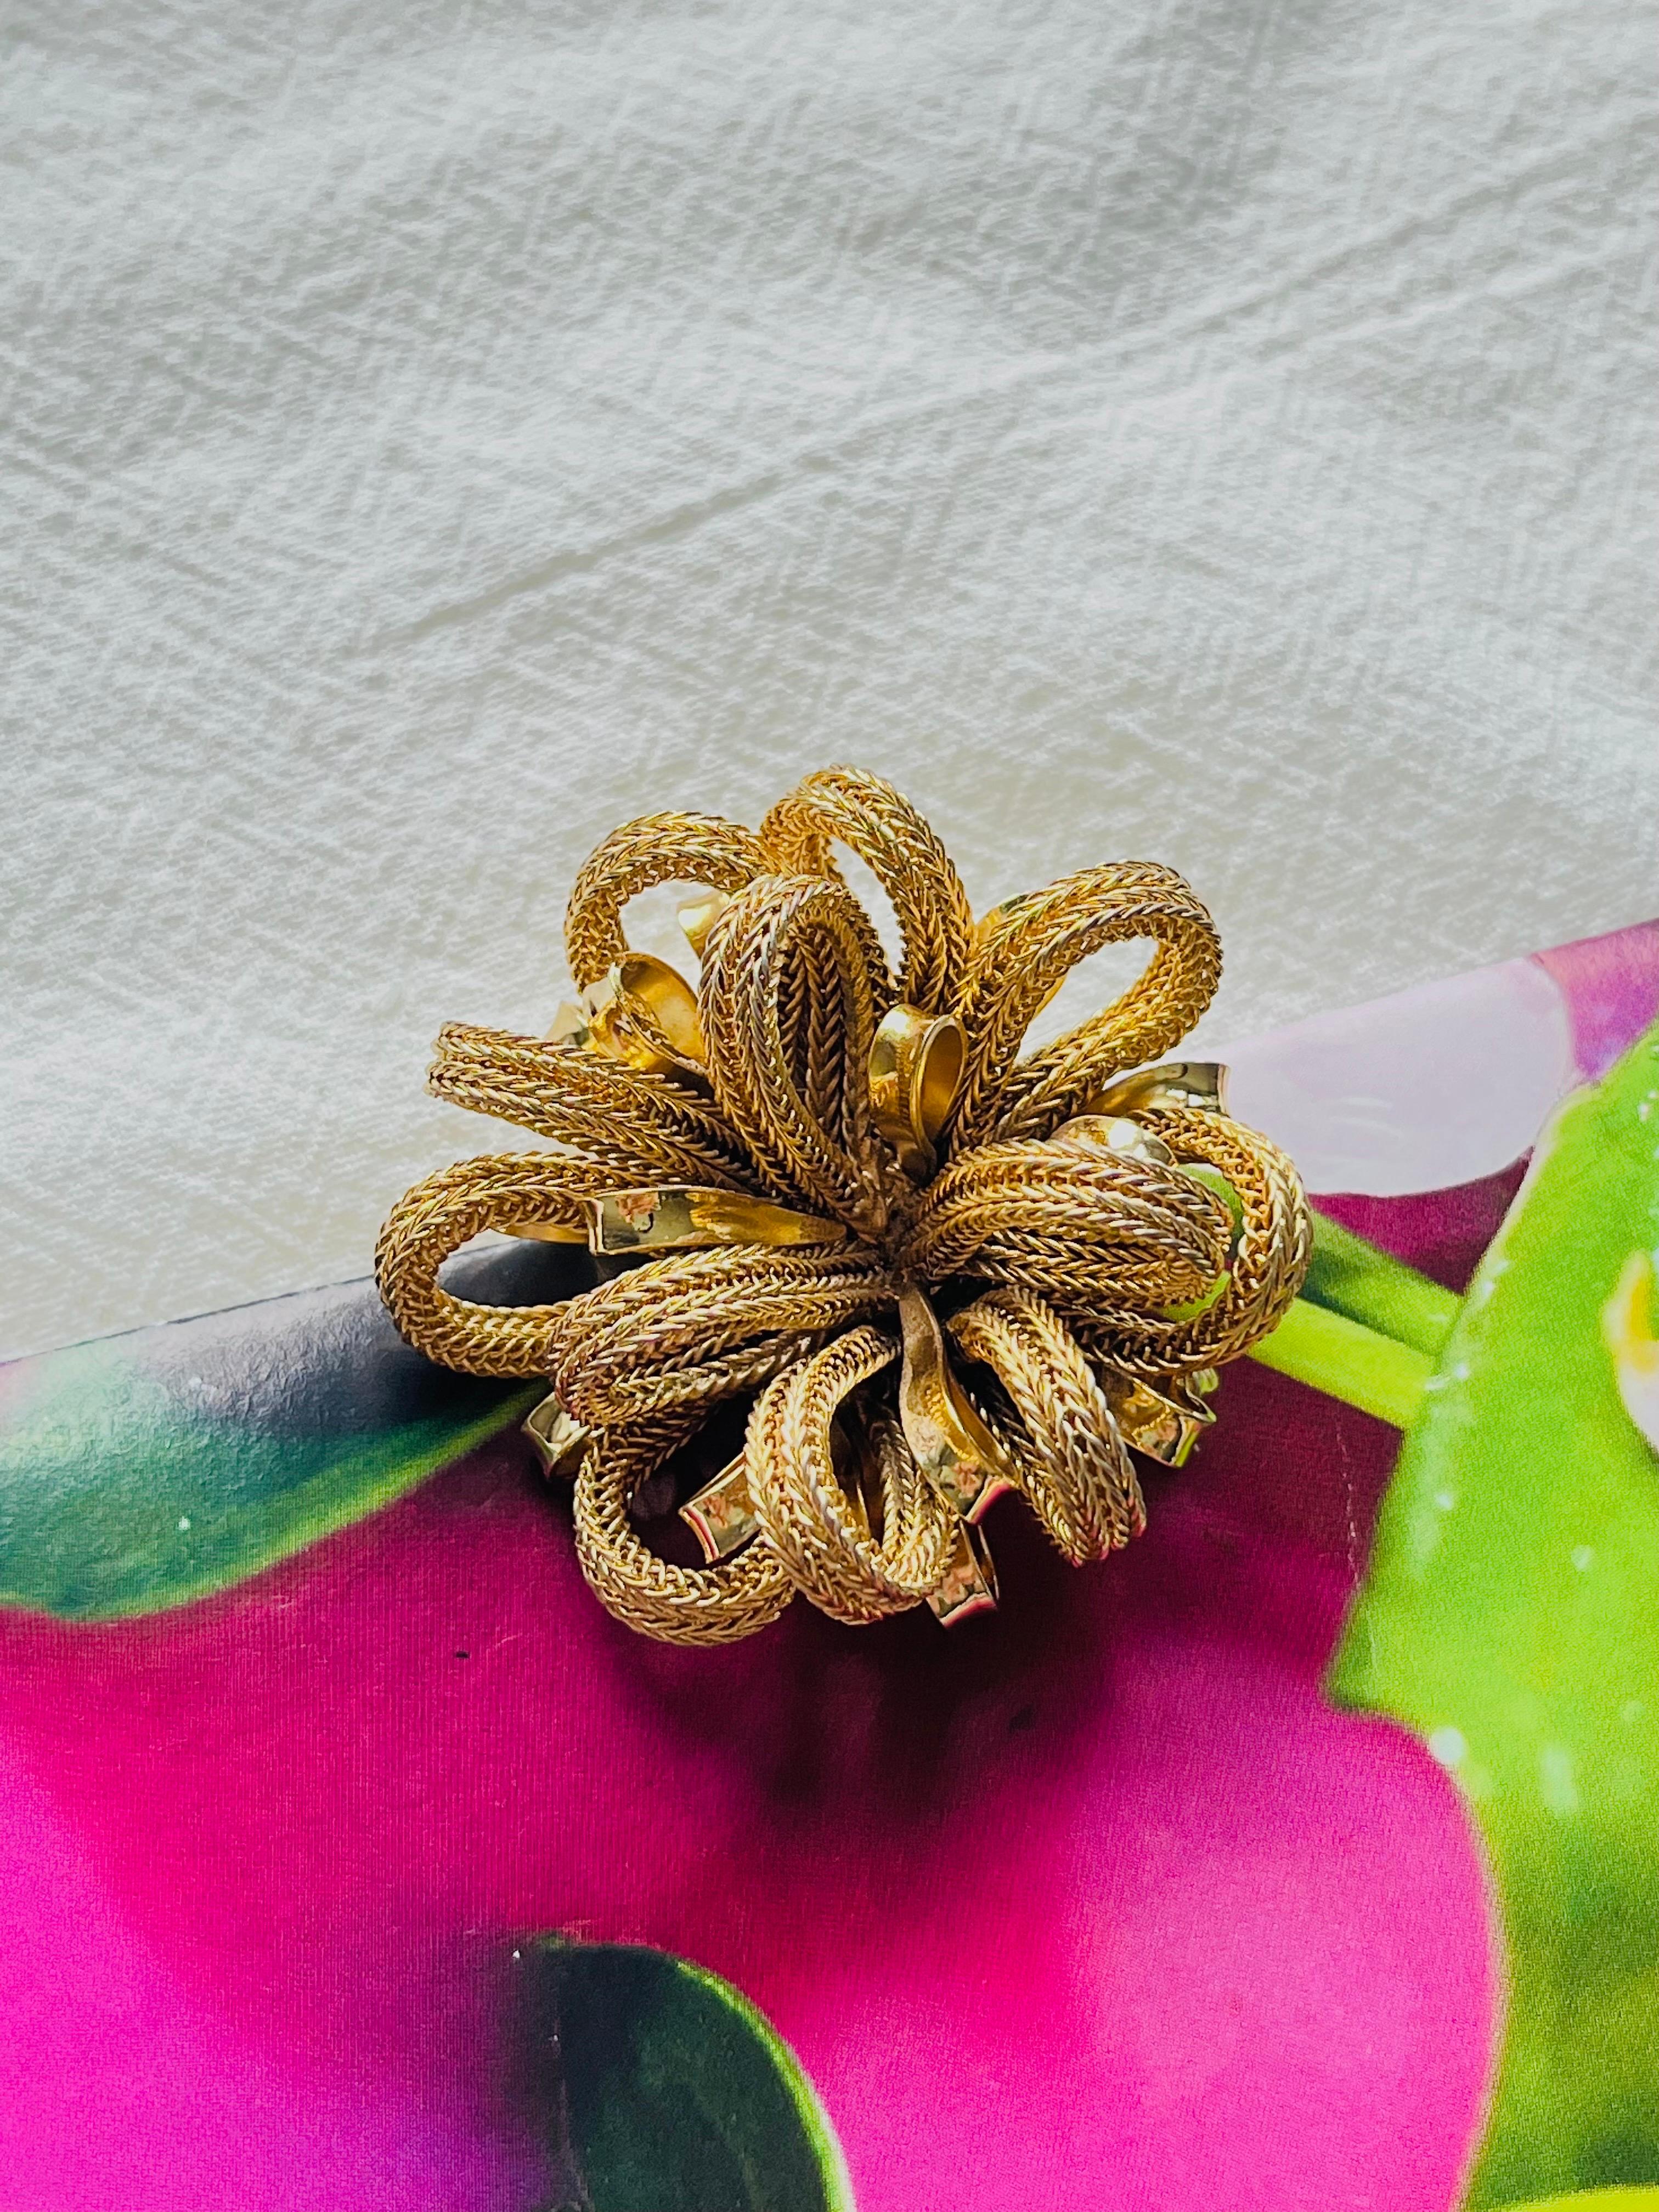 Christian Dior Vintage 1967 Vivid Mesh Knit Ribbon Bow Flourish Flower Brooch, Gold Plated

Very good condition. Light scratches or colour loss, barely noticeable. Rare to find. 100% genuine.

A unique piece. This is gold plated stylised brooch,